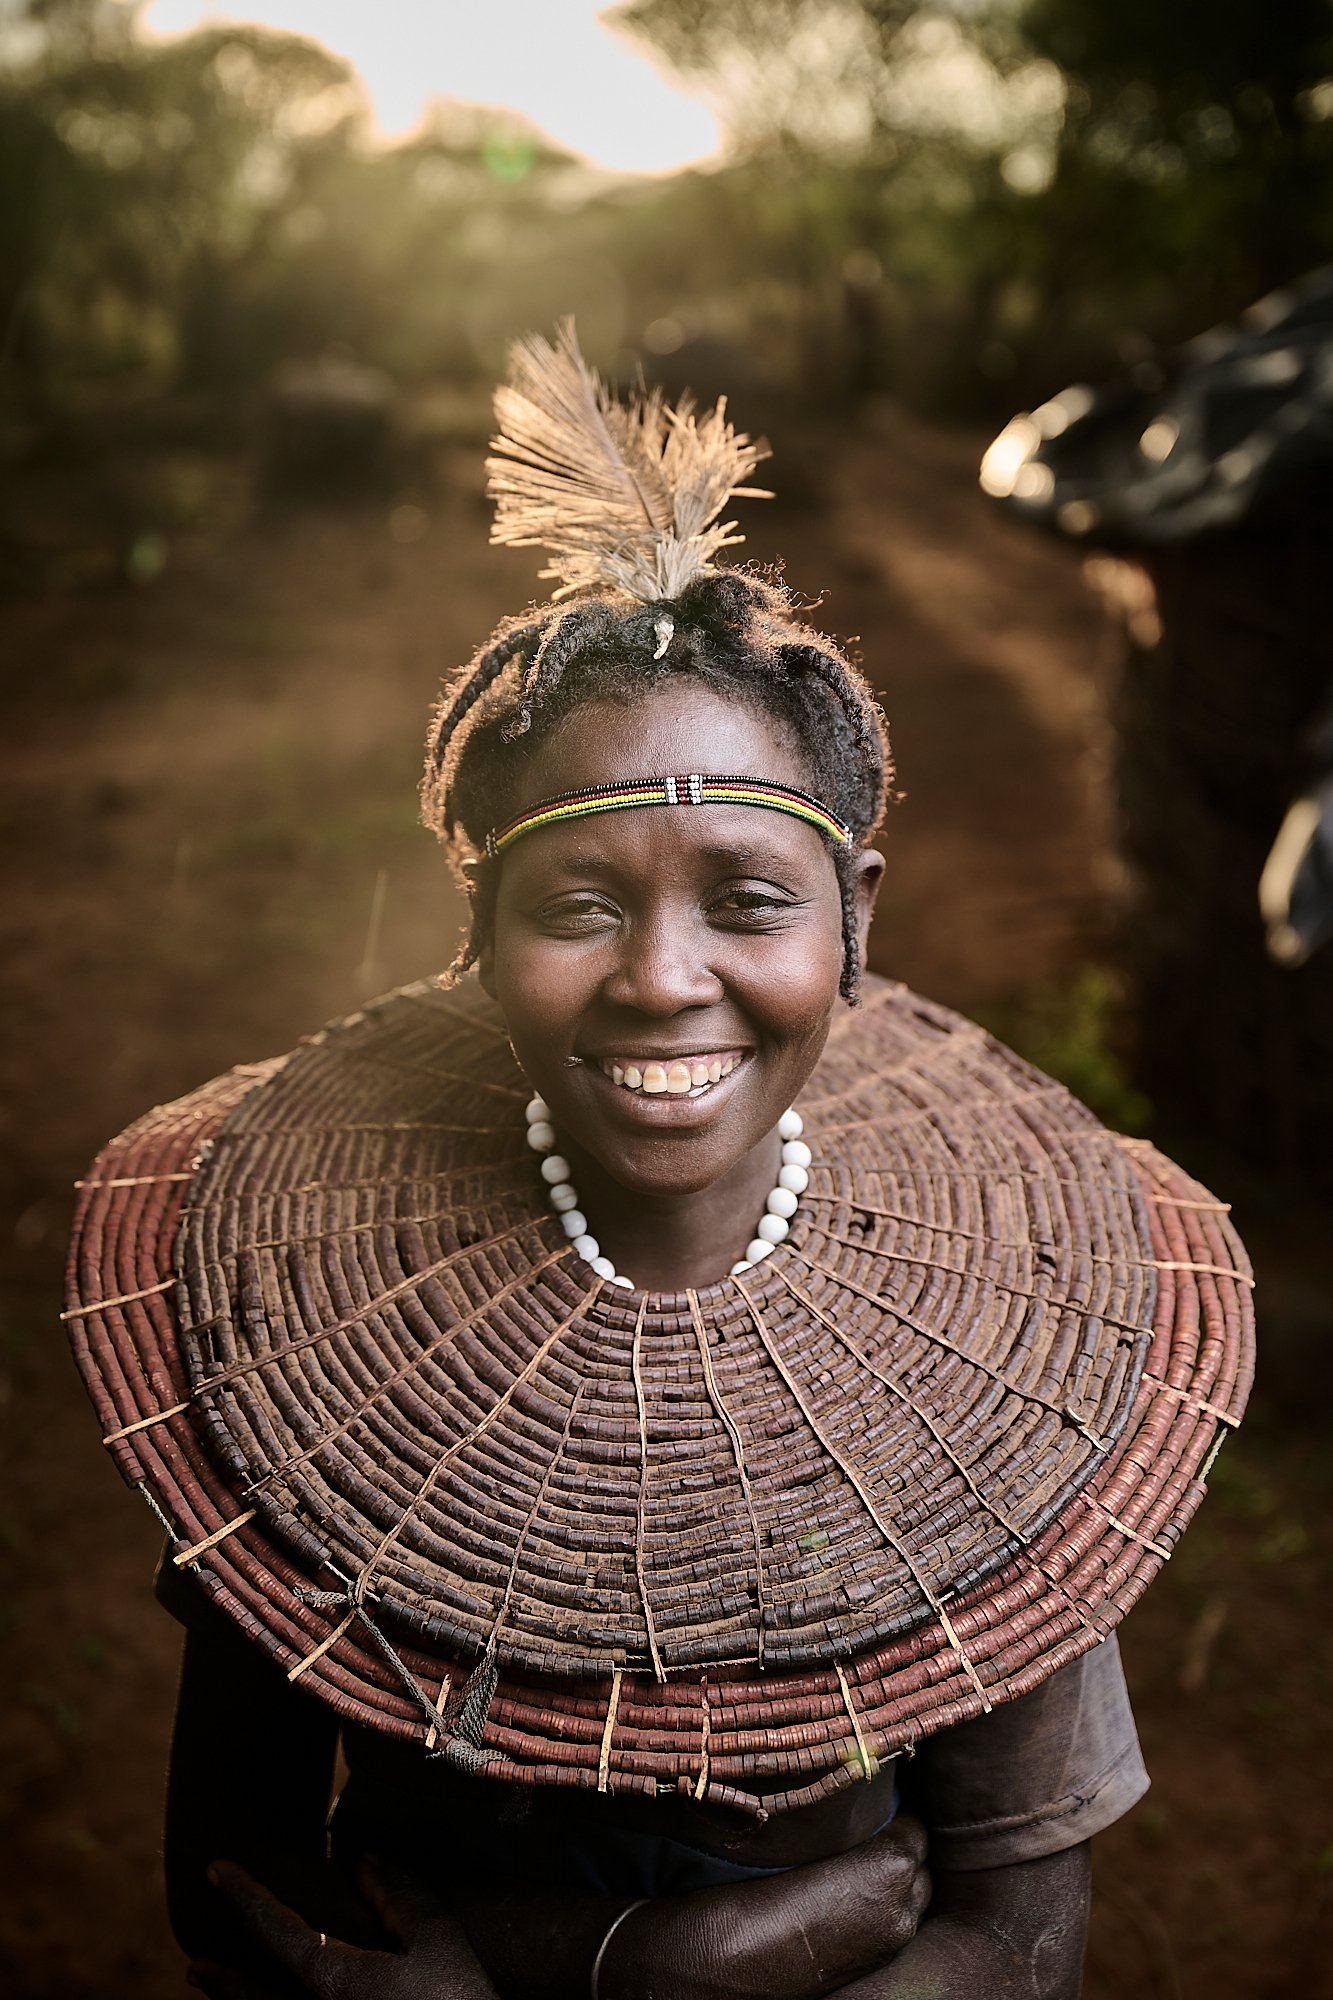 Young Pokot girl with traditional necklace